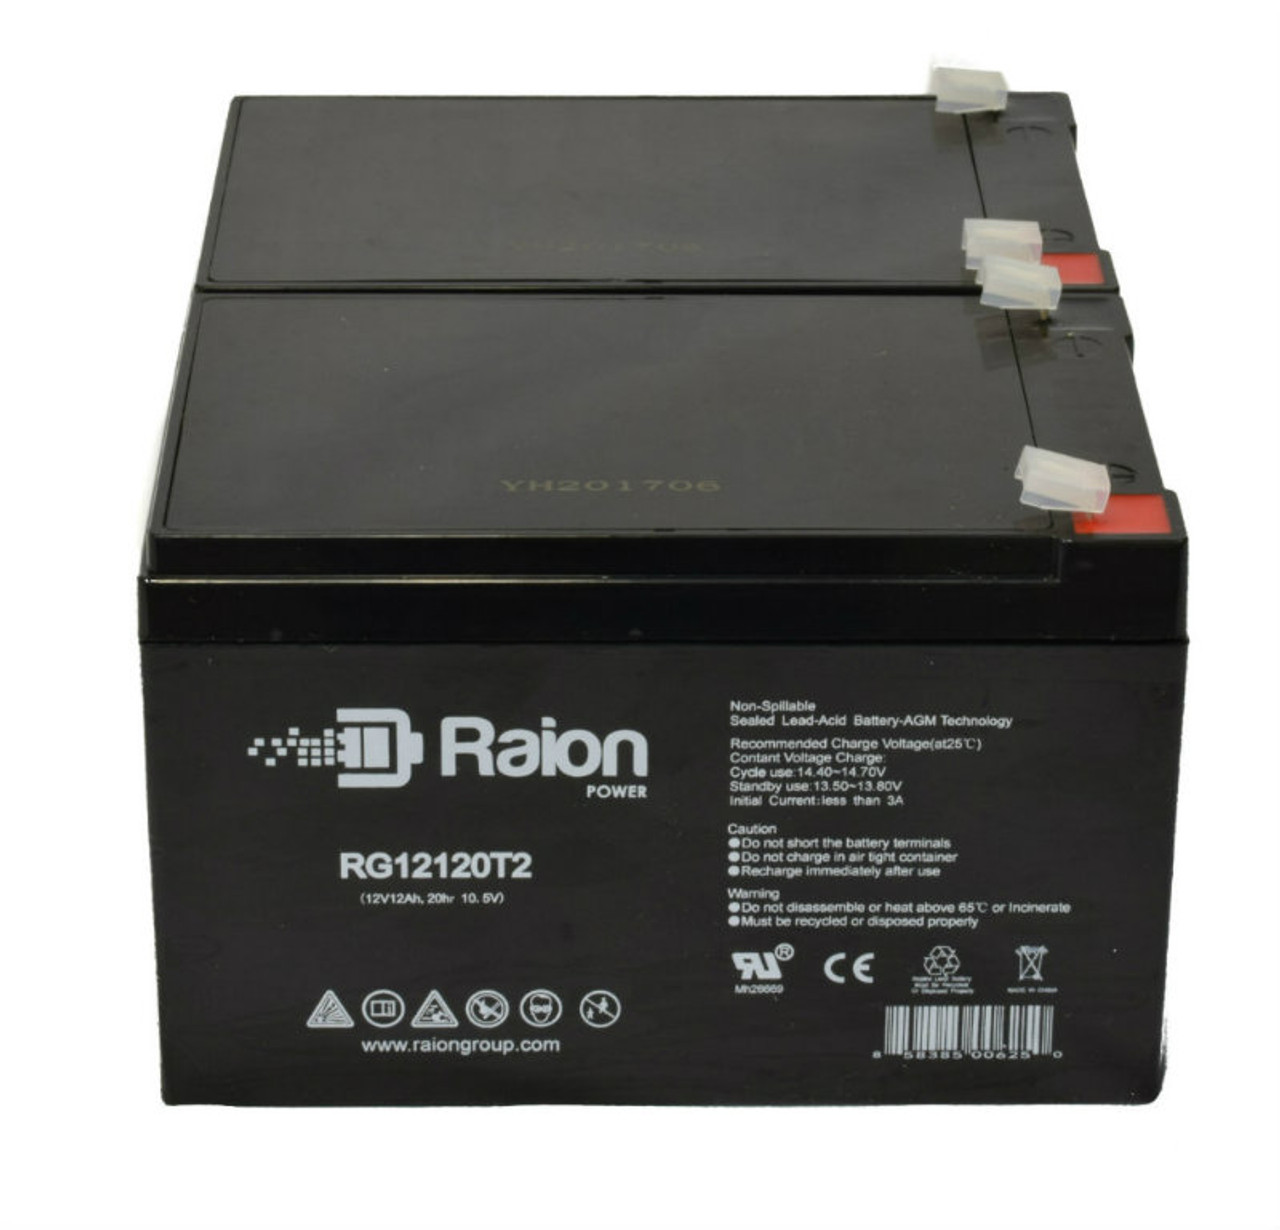 Raion Power 12V 12Ah Non-Spillable Compatible Replacement Battery for MHB MS12-12A - (2 Pack)